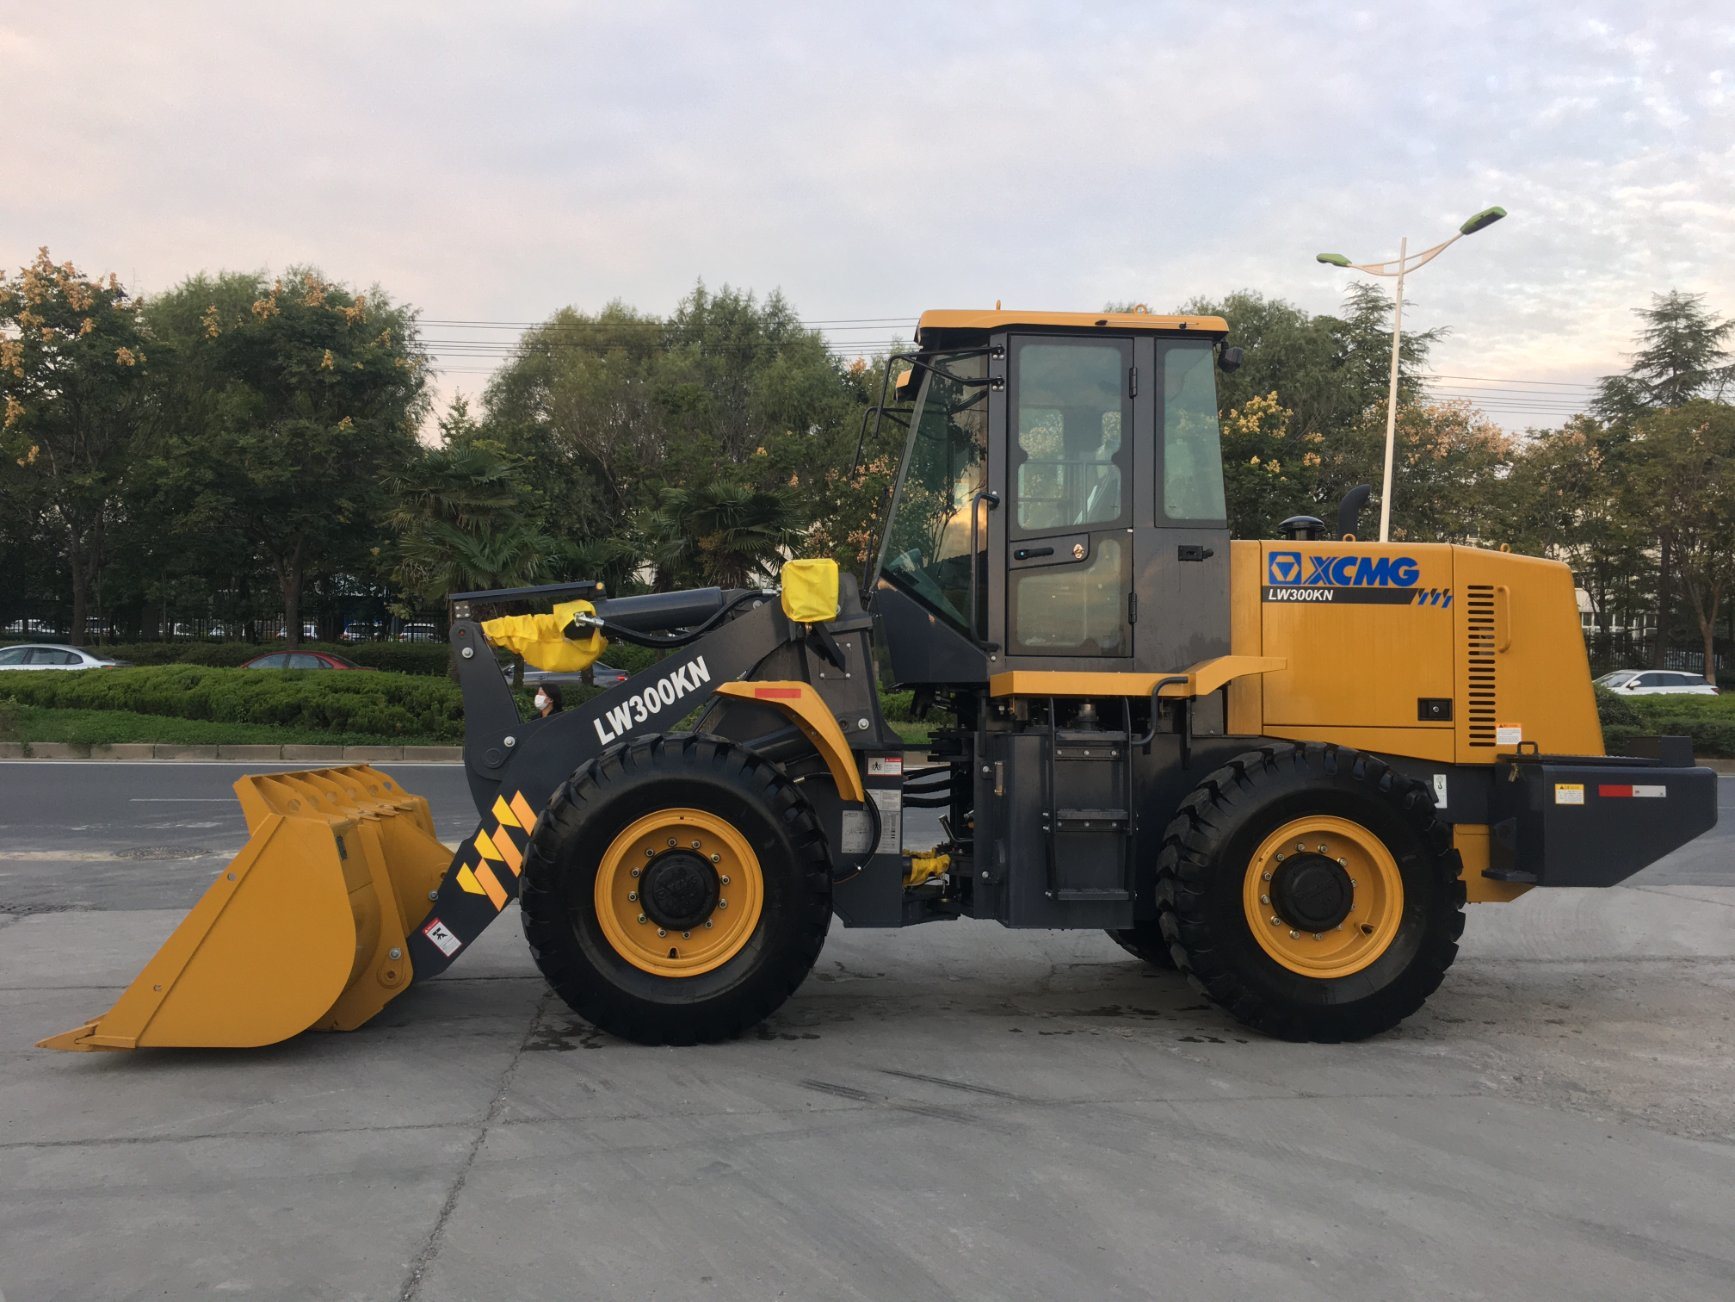 Top Sale 3 Tons Small Wheel Loader Lw300kn Lw300fn with 1.8m3 Bucket